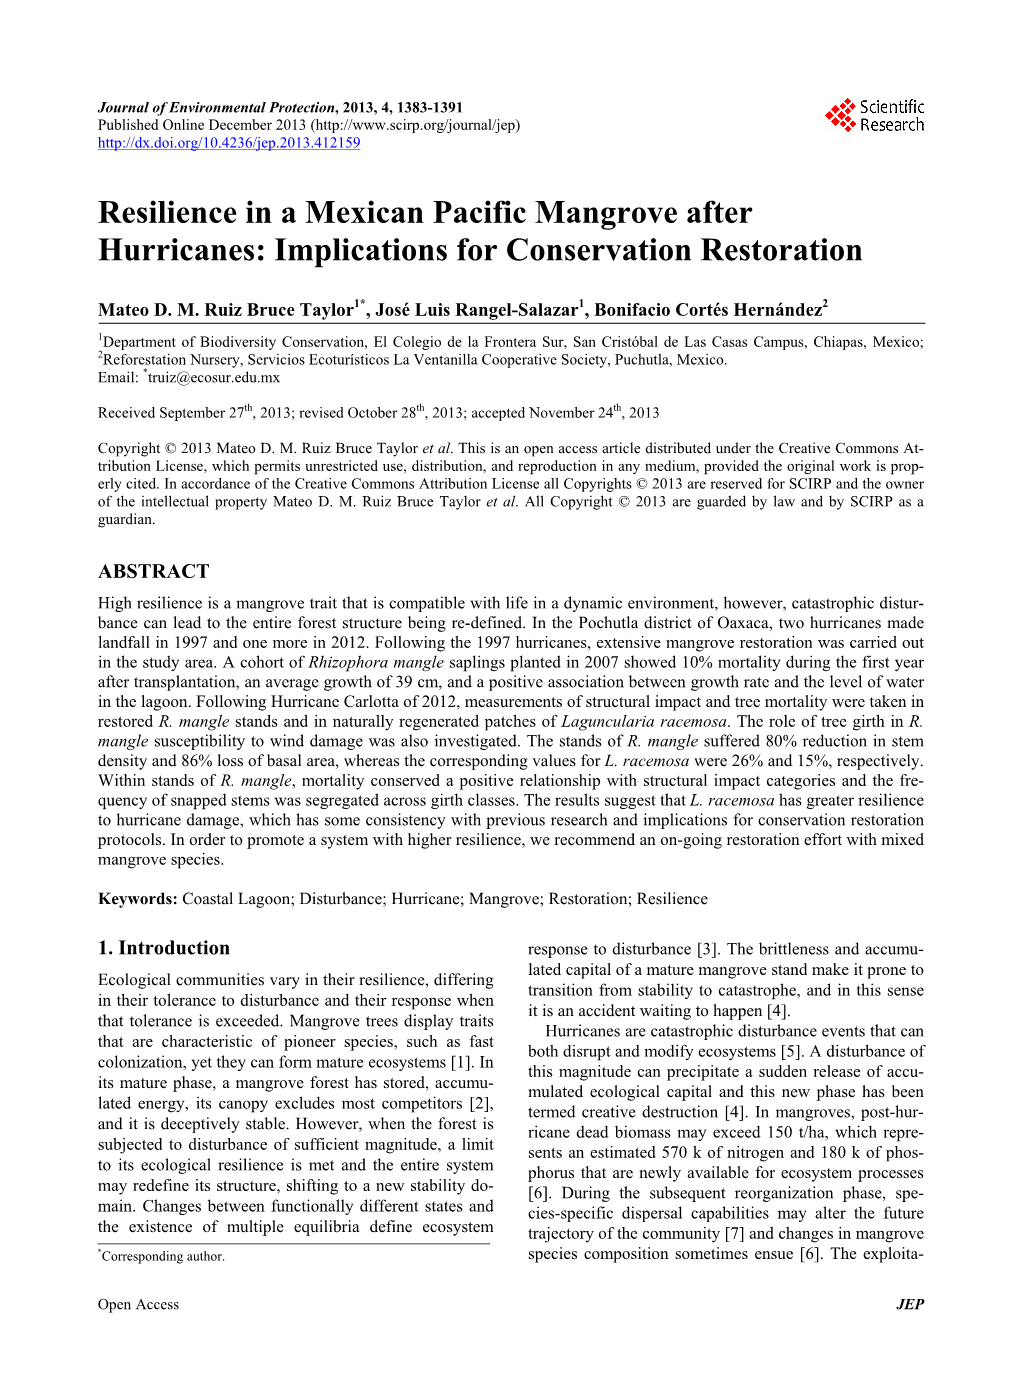 Resilience in a Mexican Pacific Mangrove After Hurricanes: Implications for Conservation Restoration